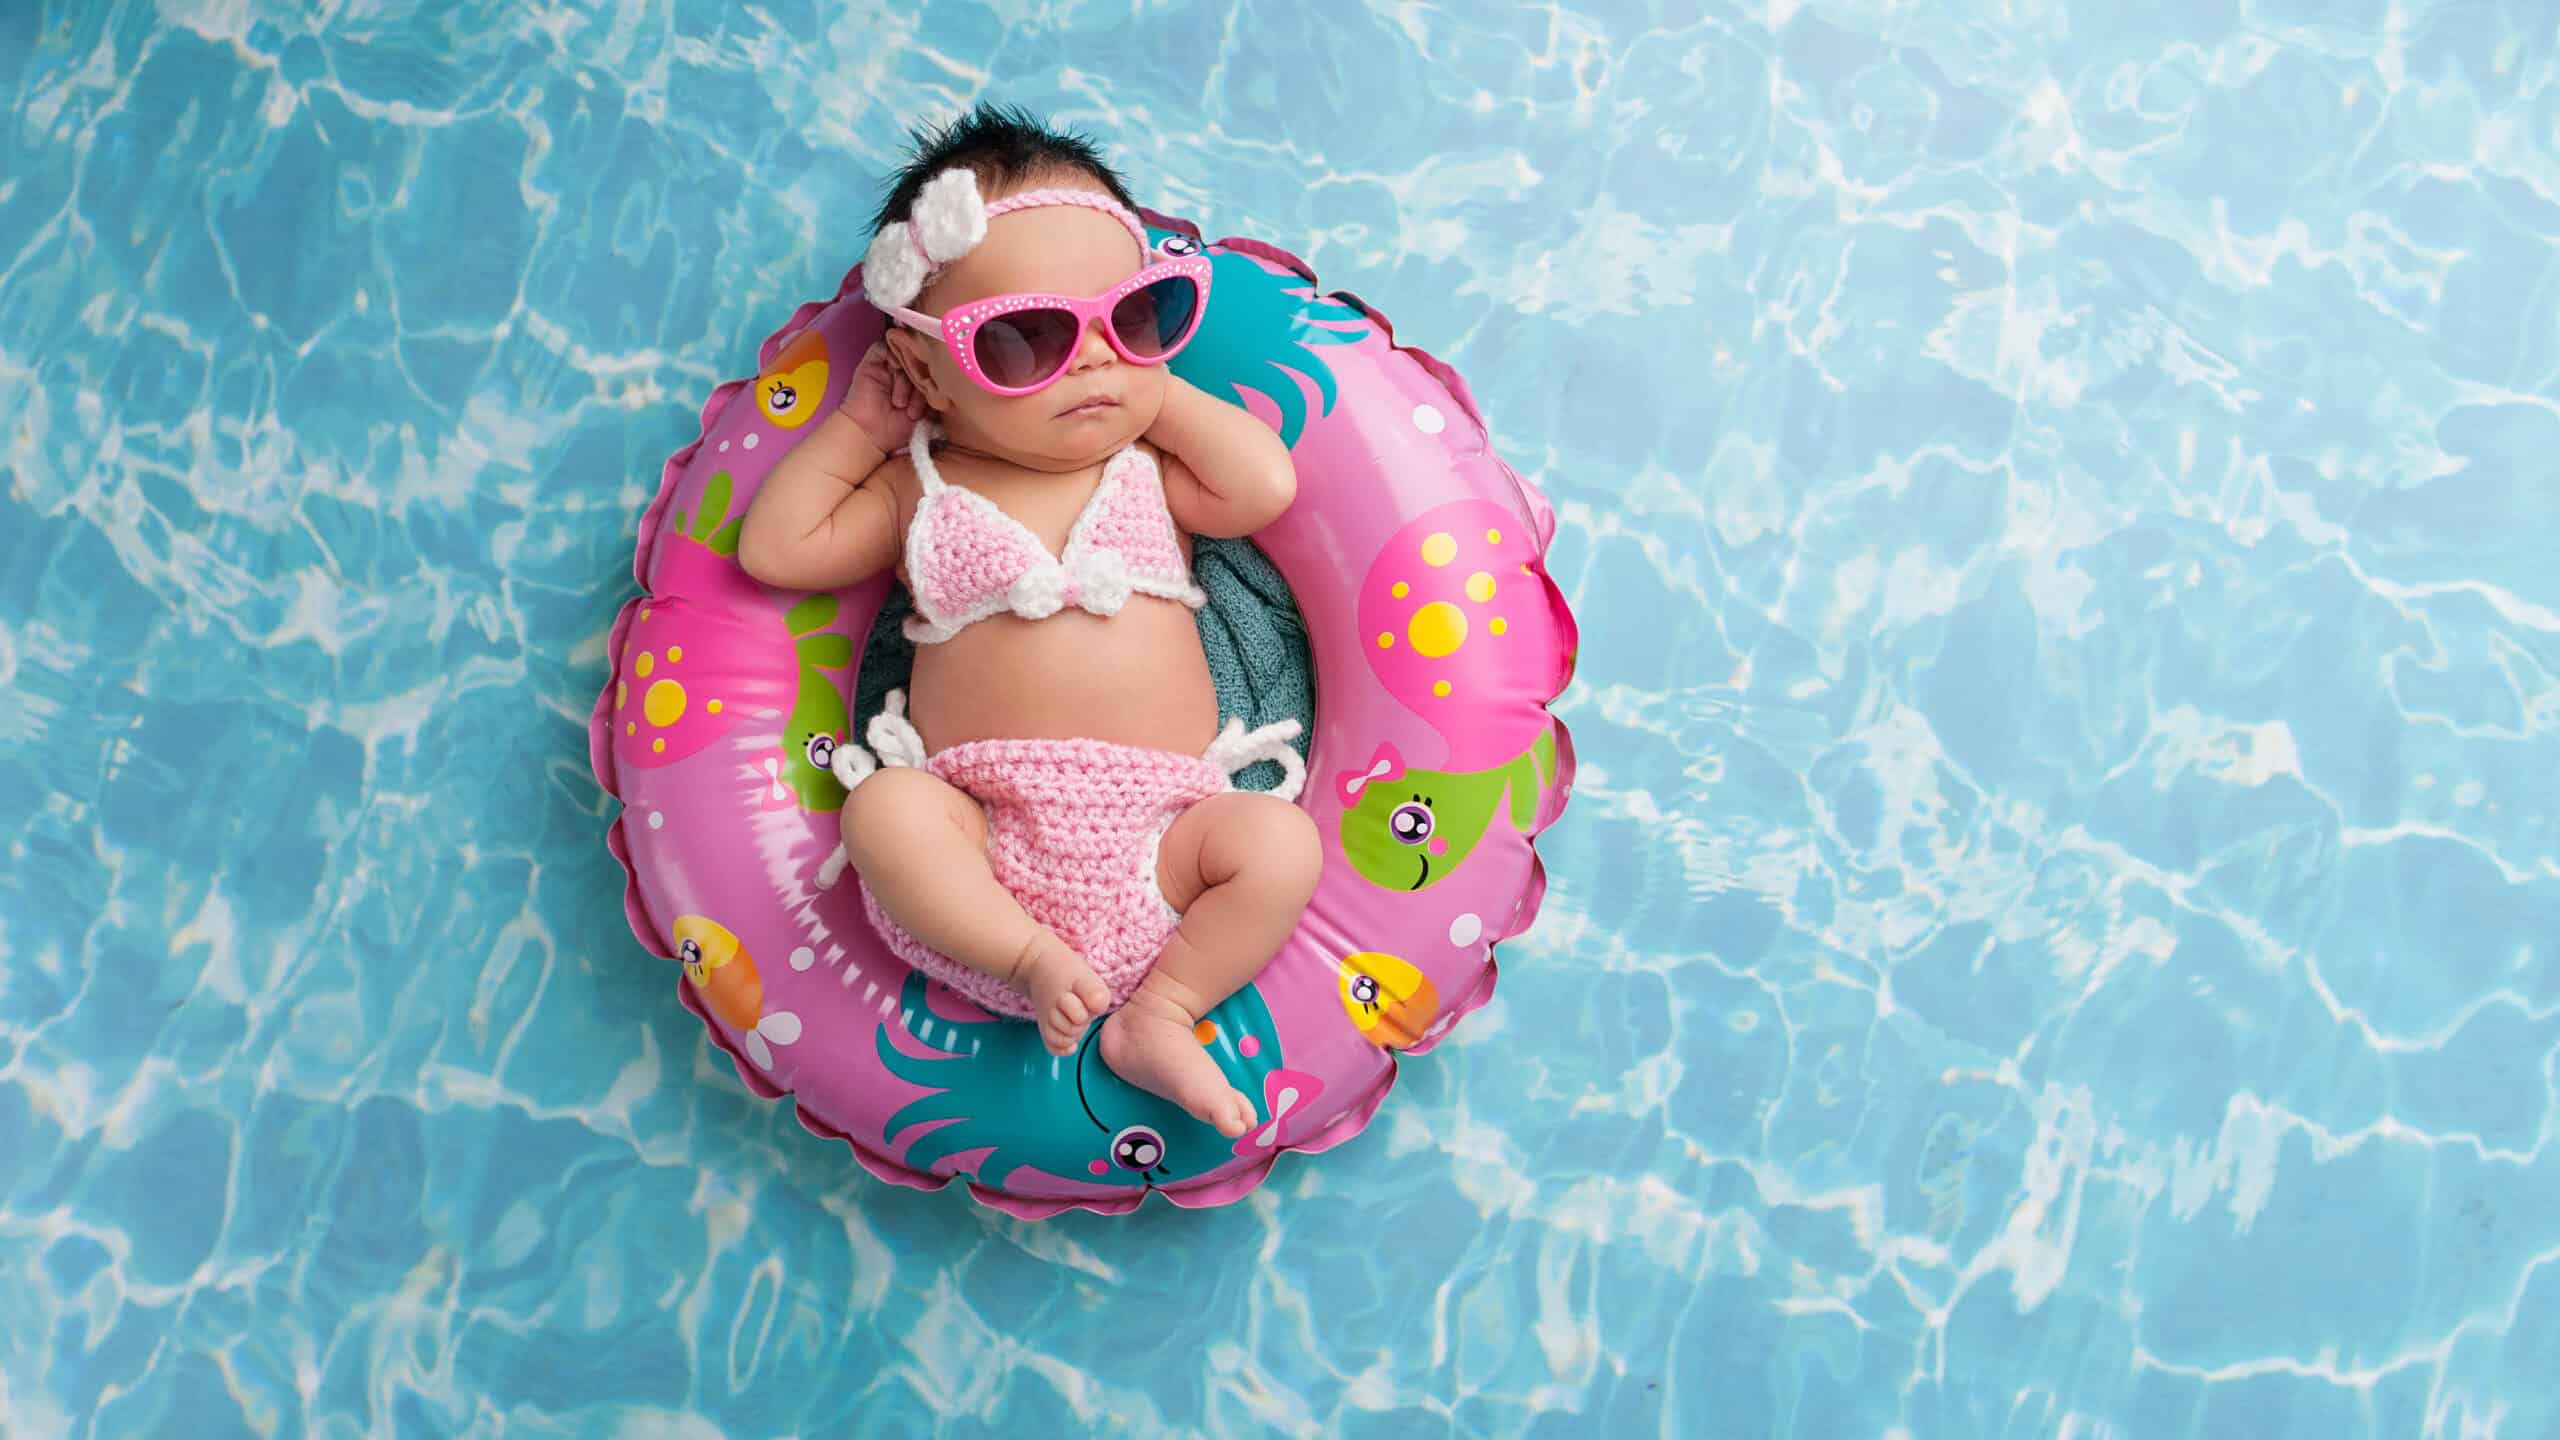 Nine day old newborn baby girl sleeping on a tiny inflatable swim ring. She is wearing a crocheted pink and white bikini and pink sunglasses.